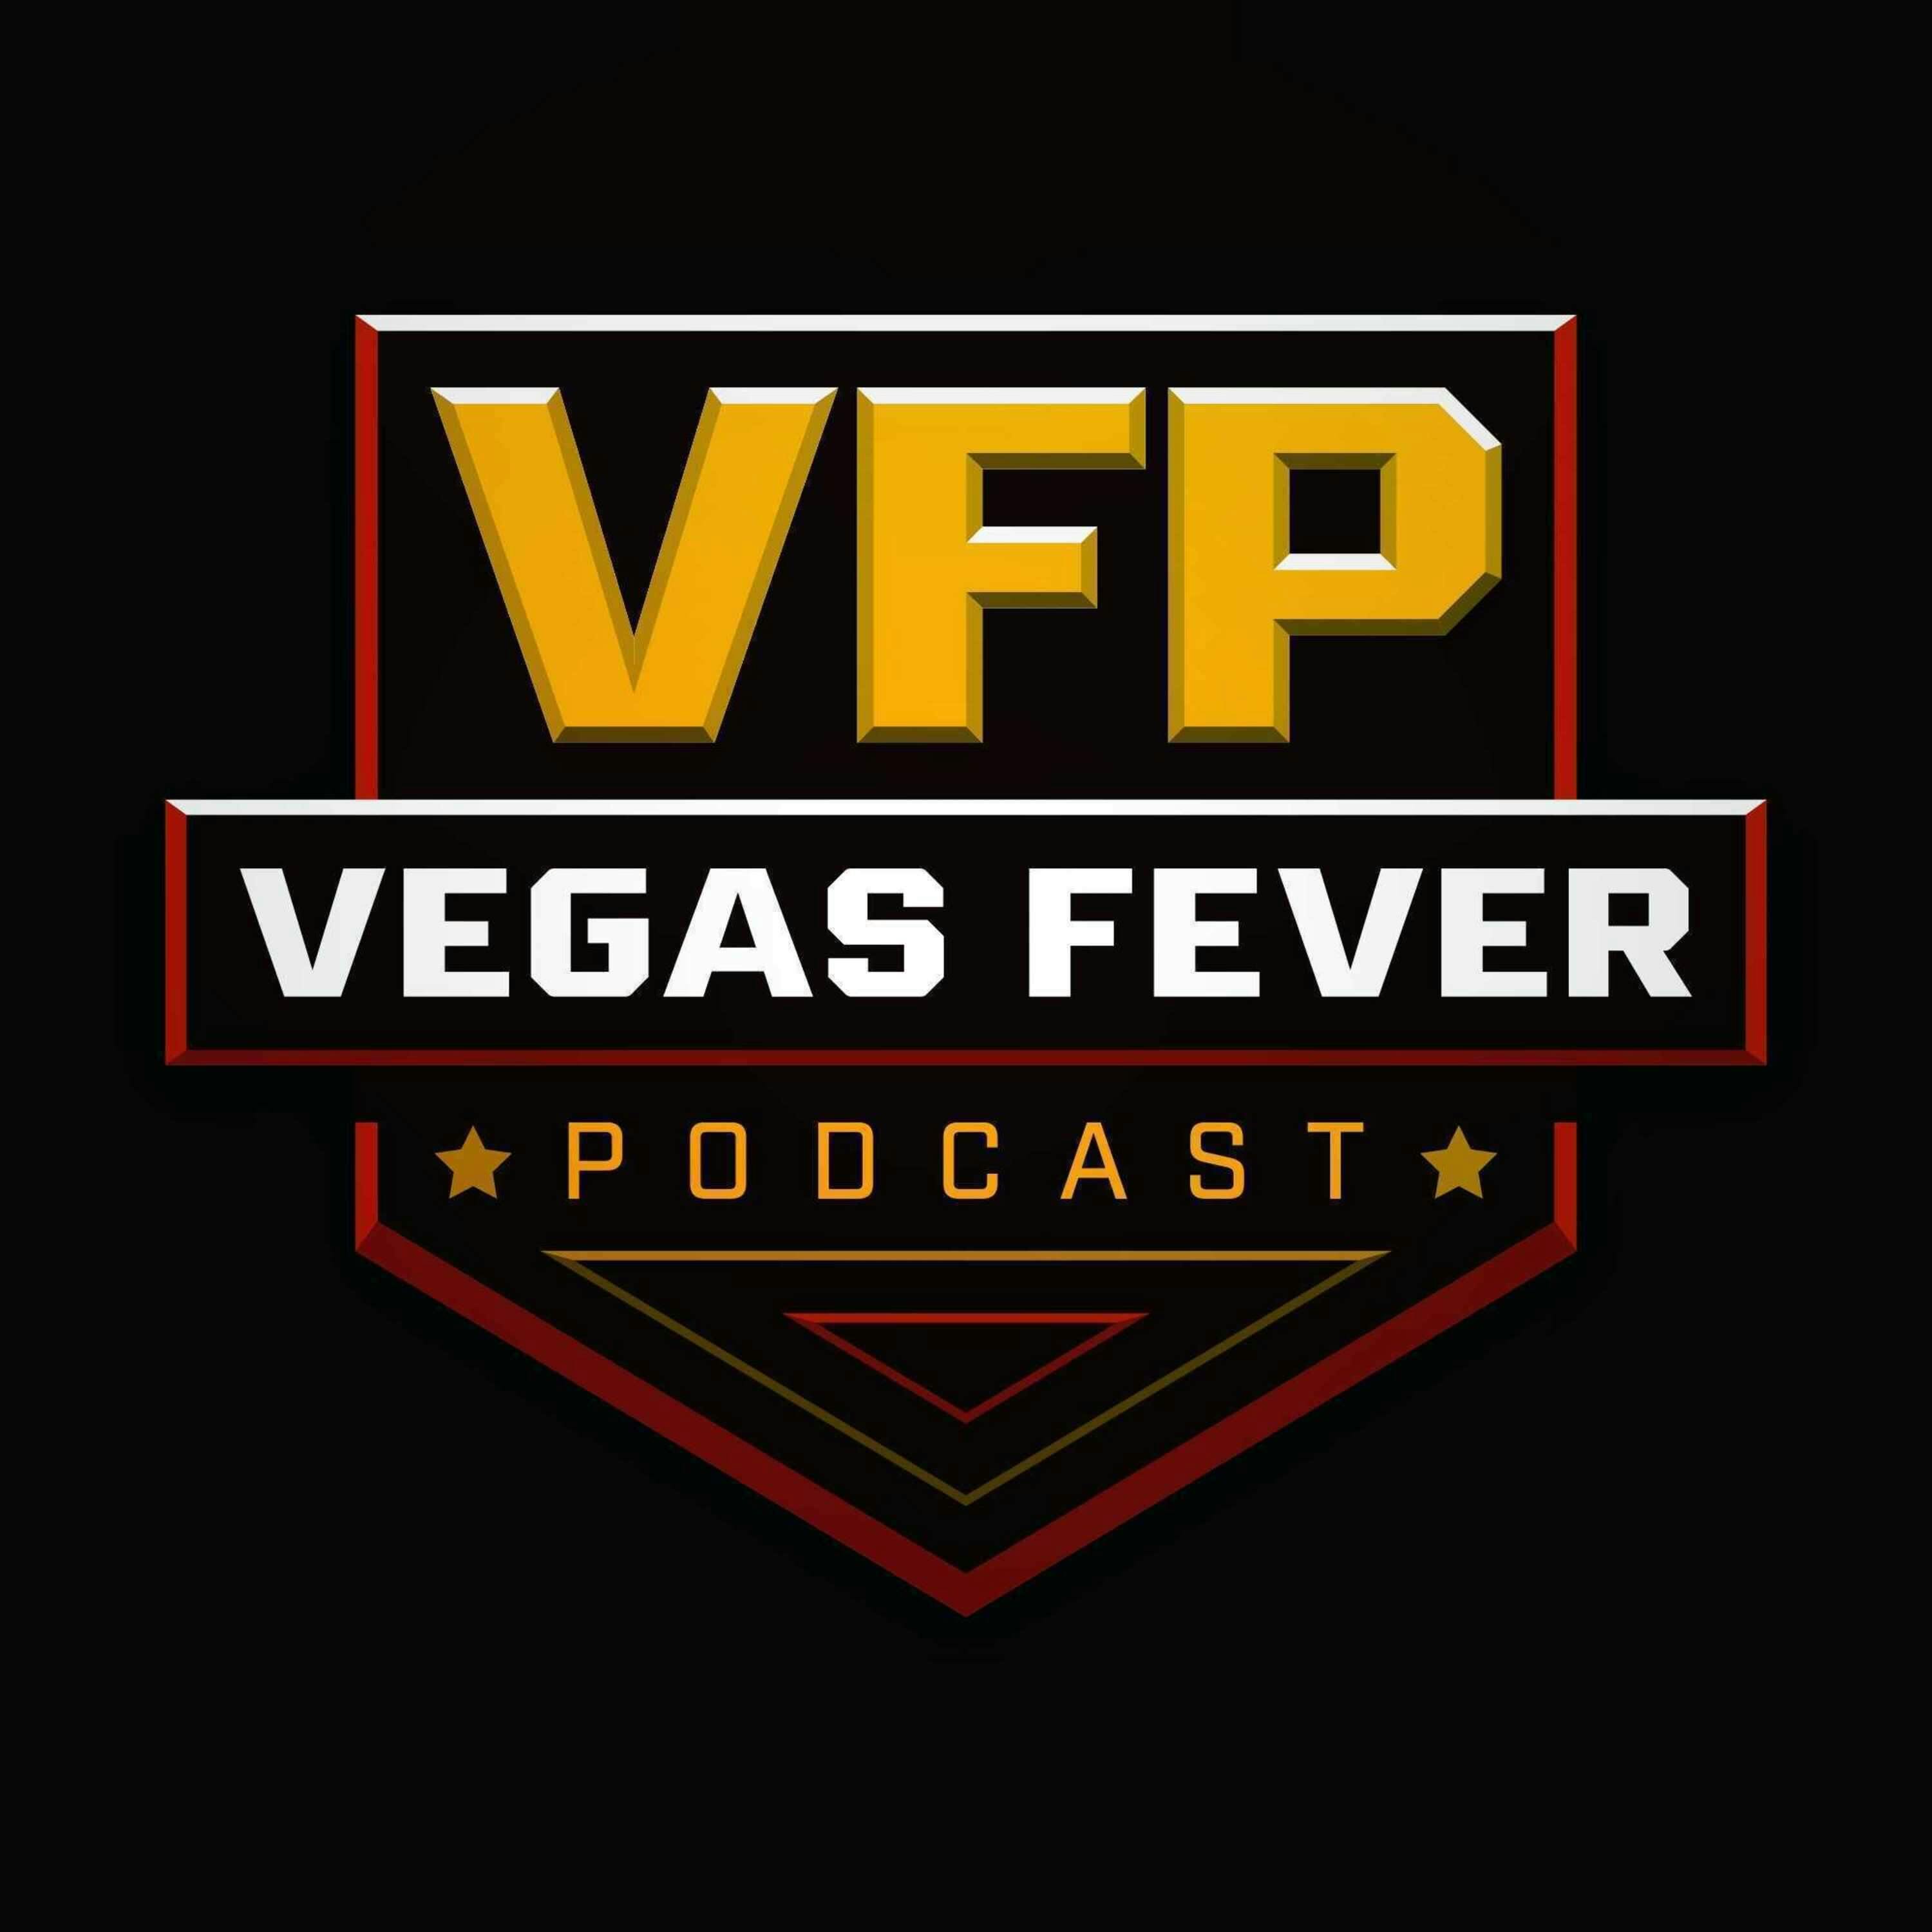 We discuss the VGK and UNLV seasons so far, while throwing in a MLS and Las Vegas A's update. also.